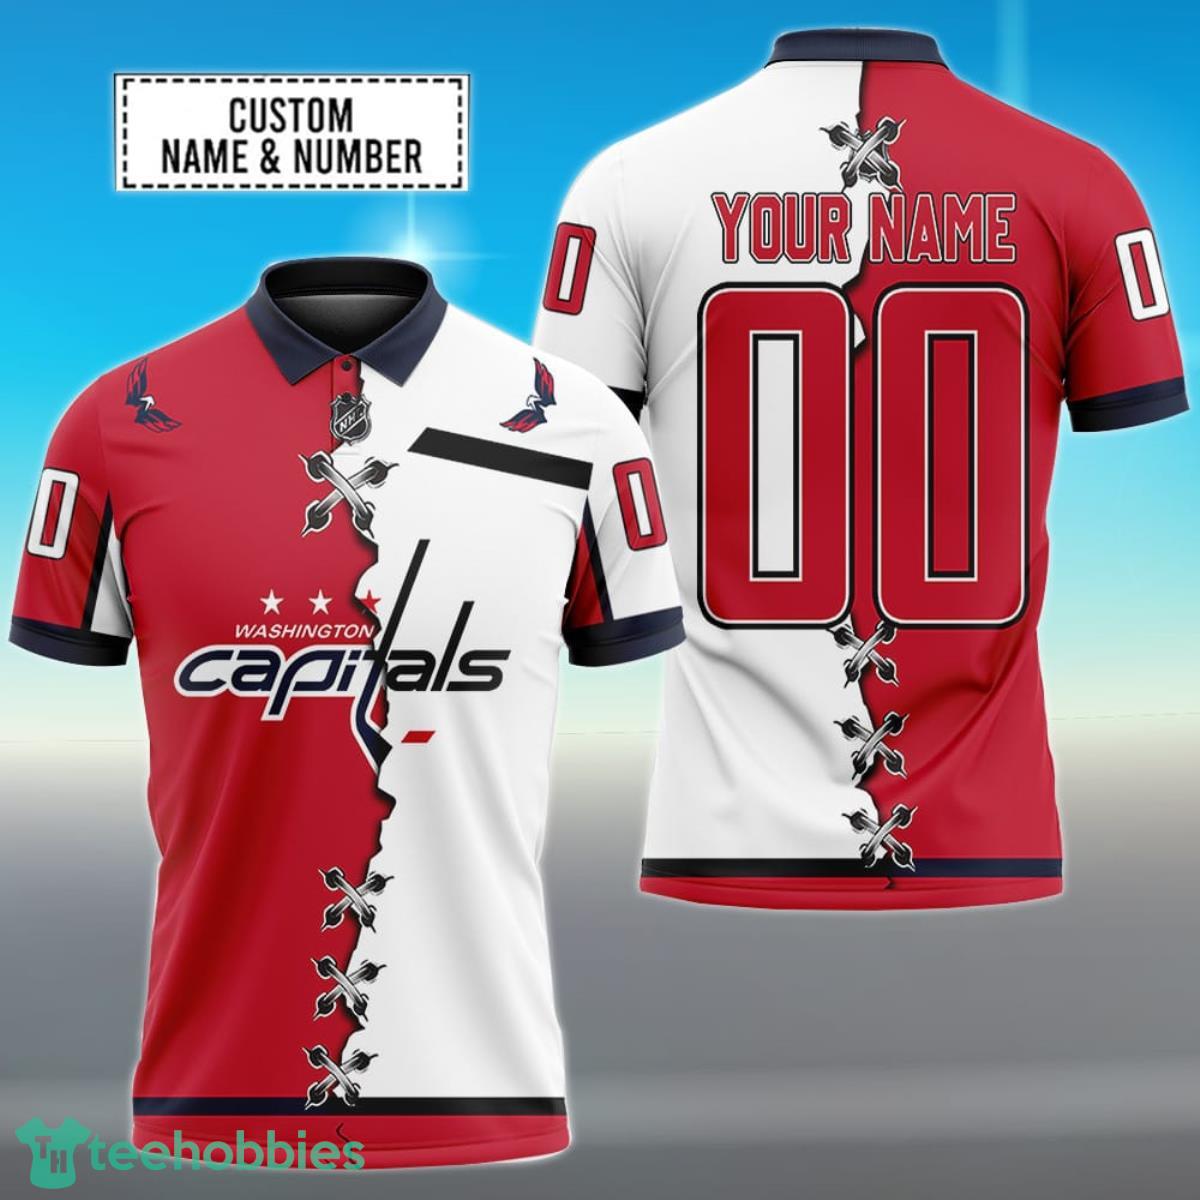 Washington Capitals Personalized Name NHL Mix Jersey Polo Shirt Best Gift For Fans Product Photo 1